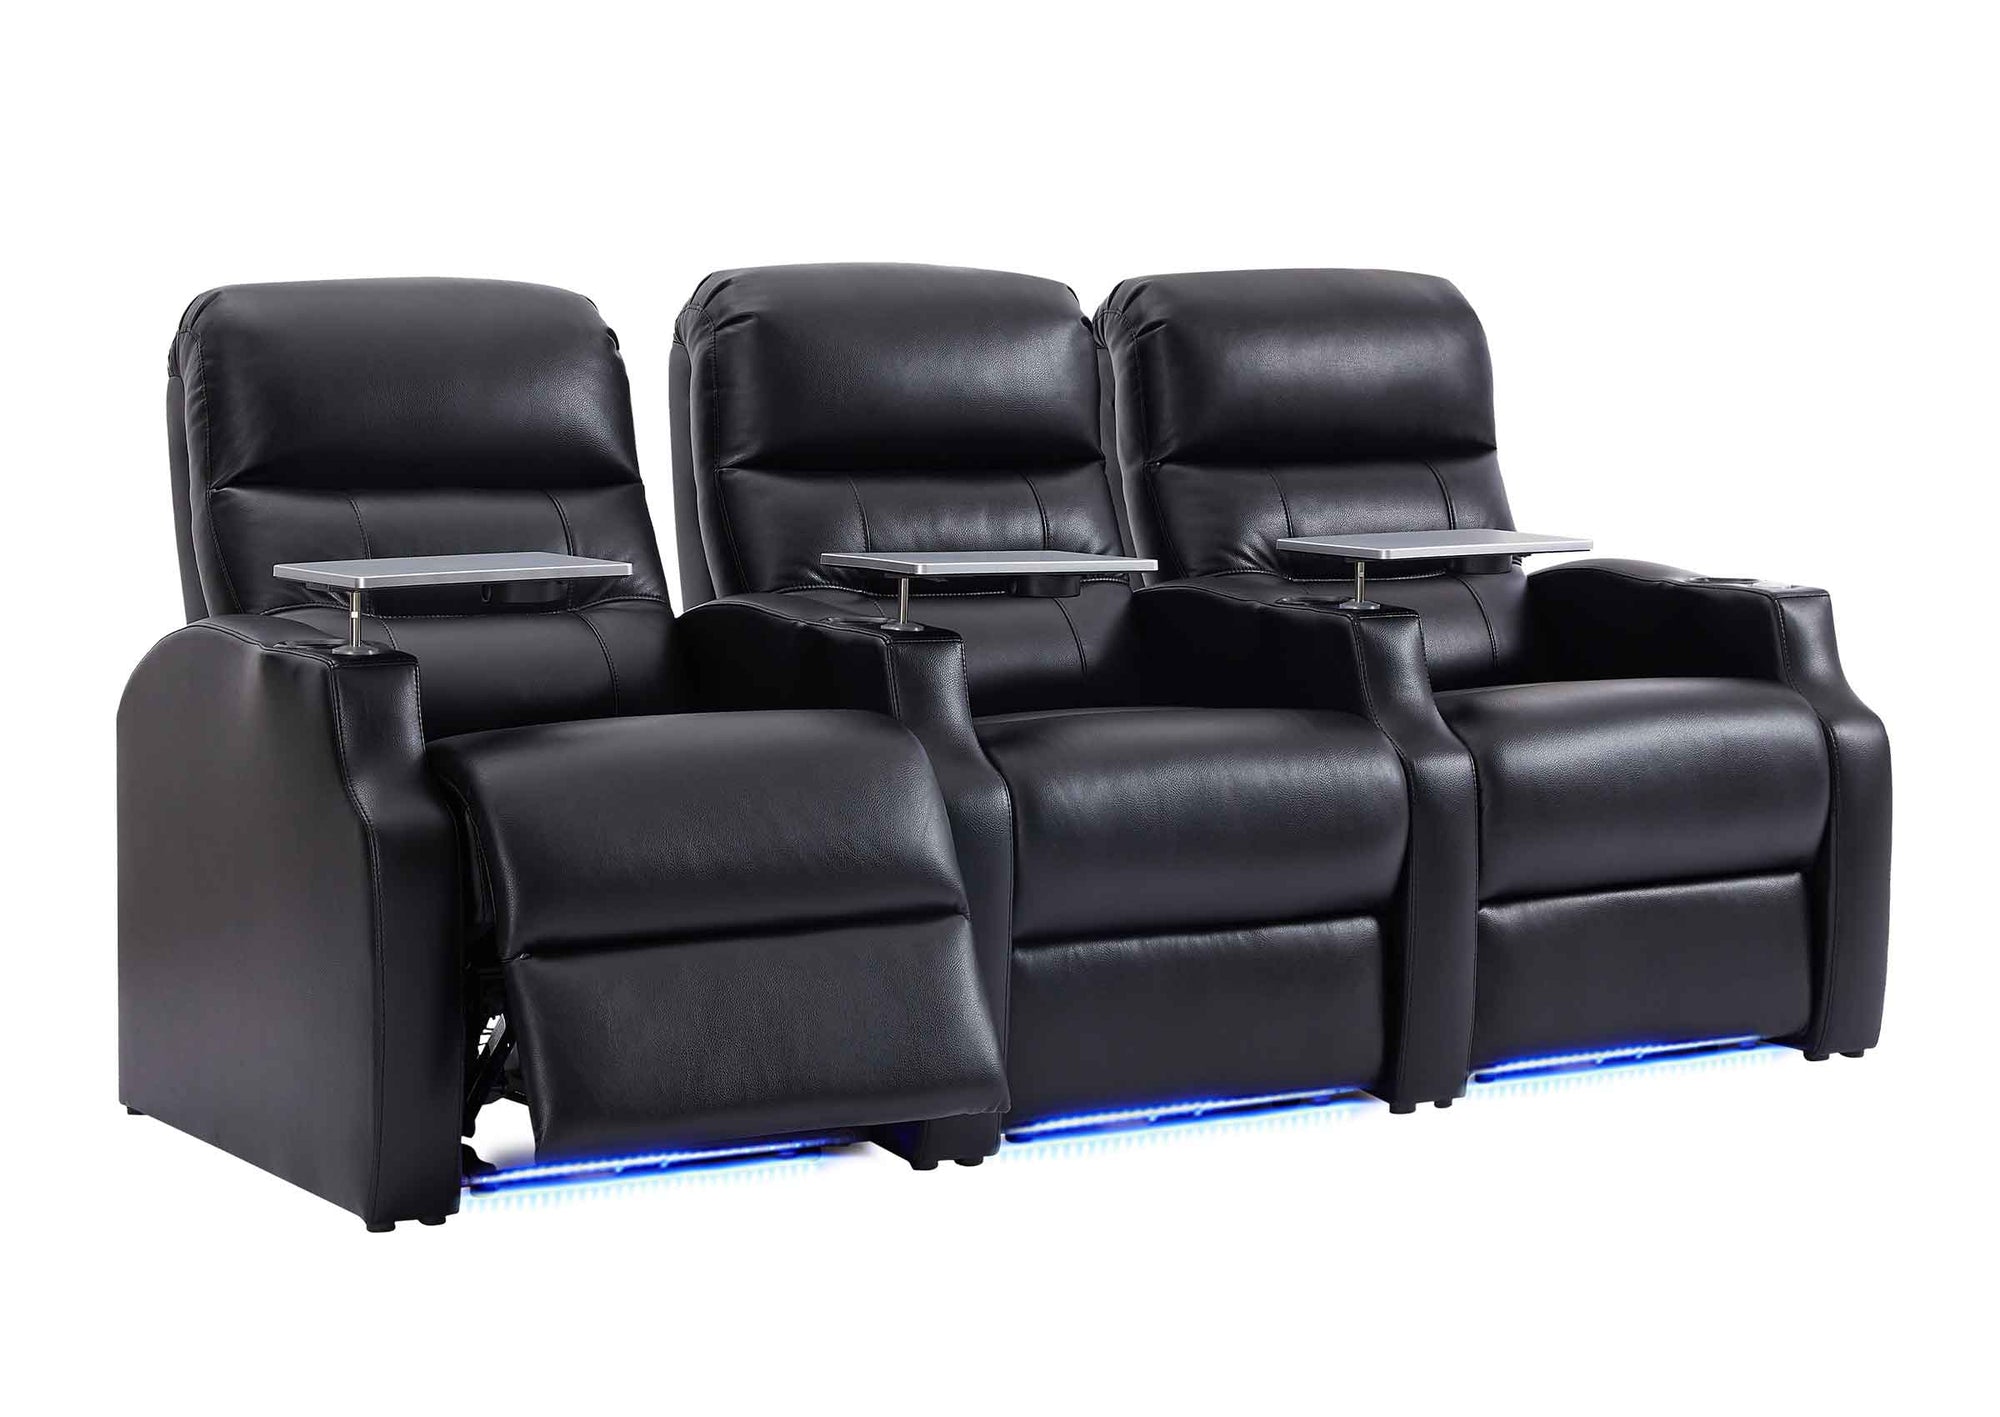 moving seats theater